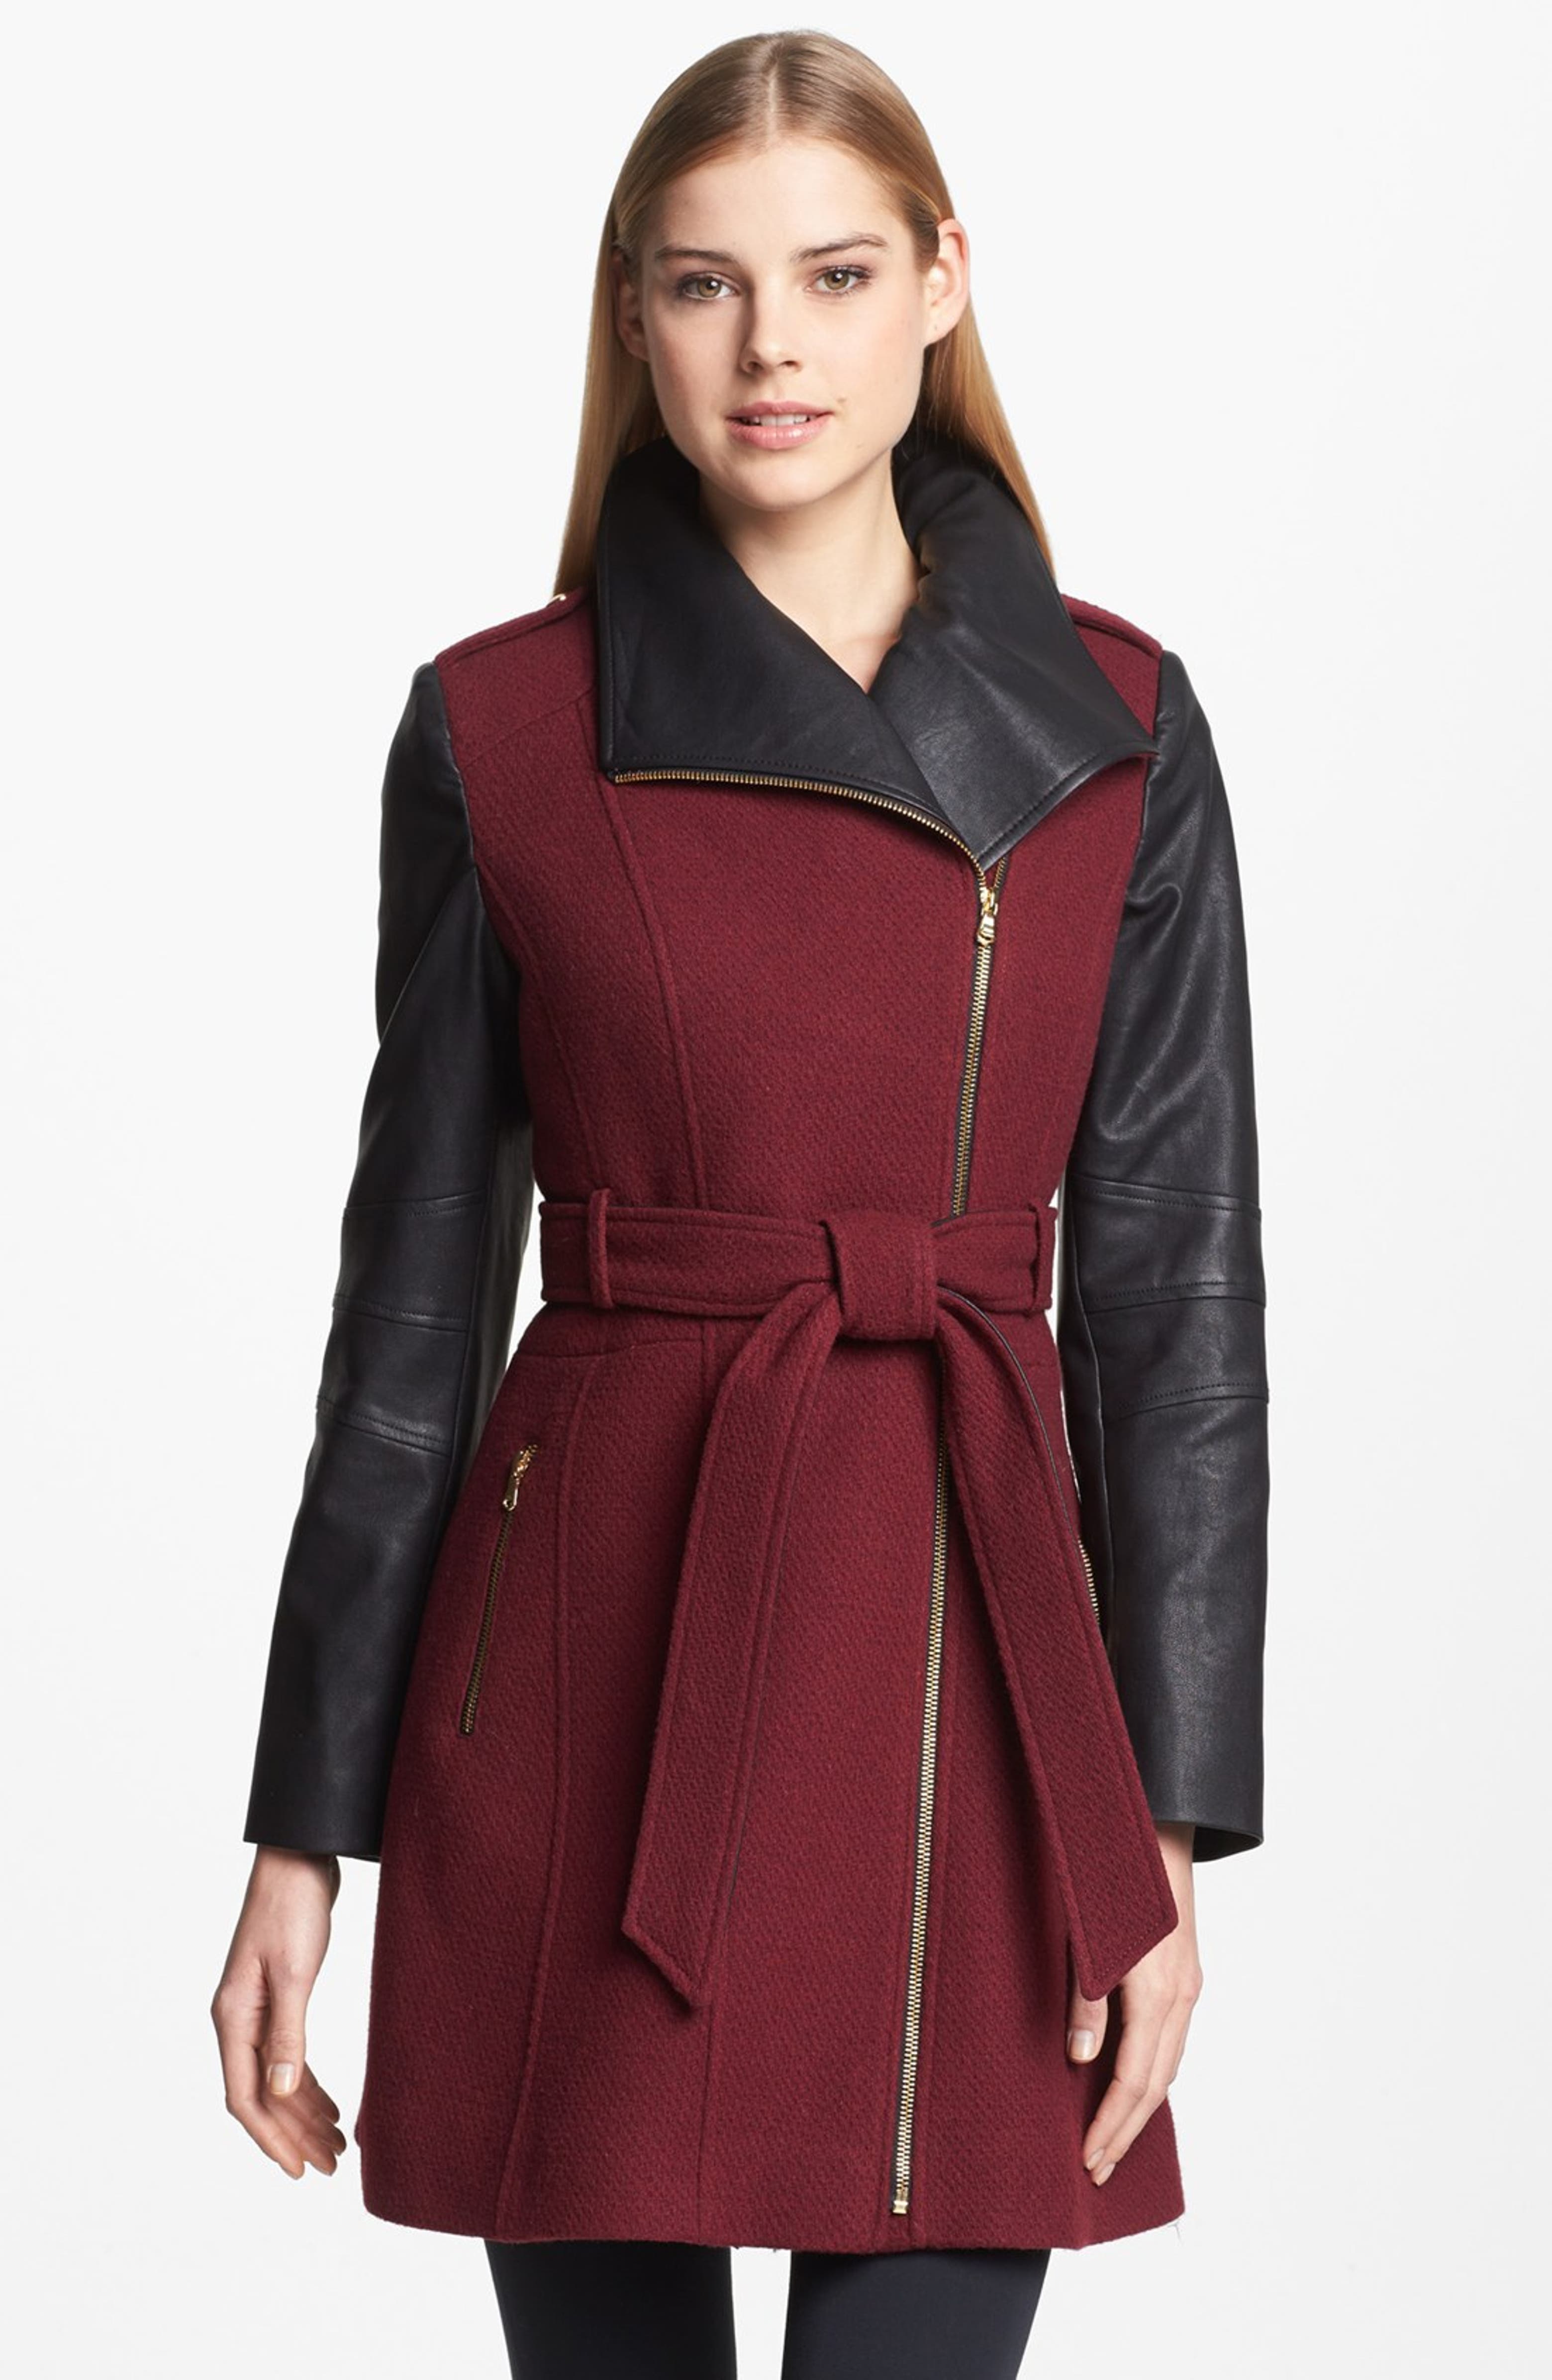 GUESS Asymmetrical Textured Wool Blend & Faux Leather Coat | Nordstrom